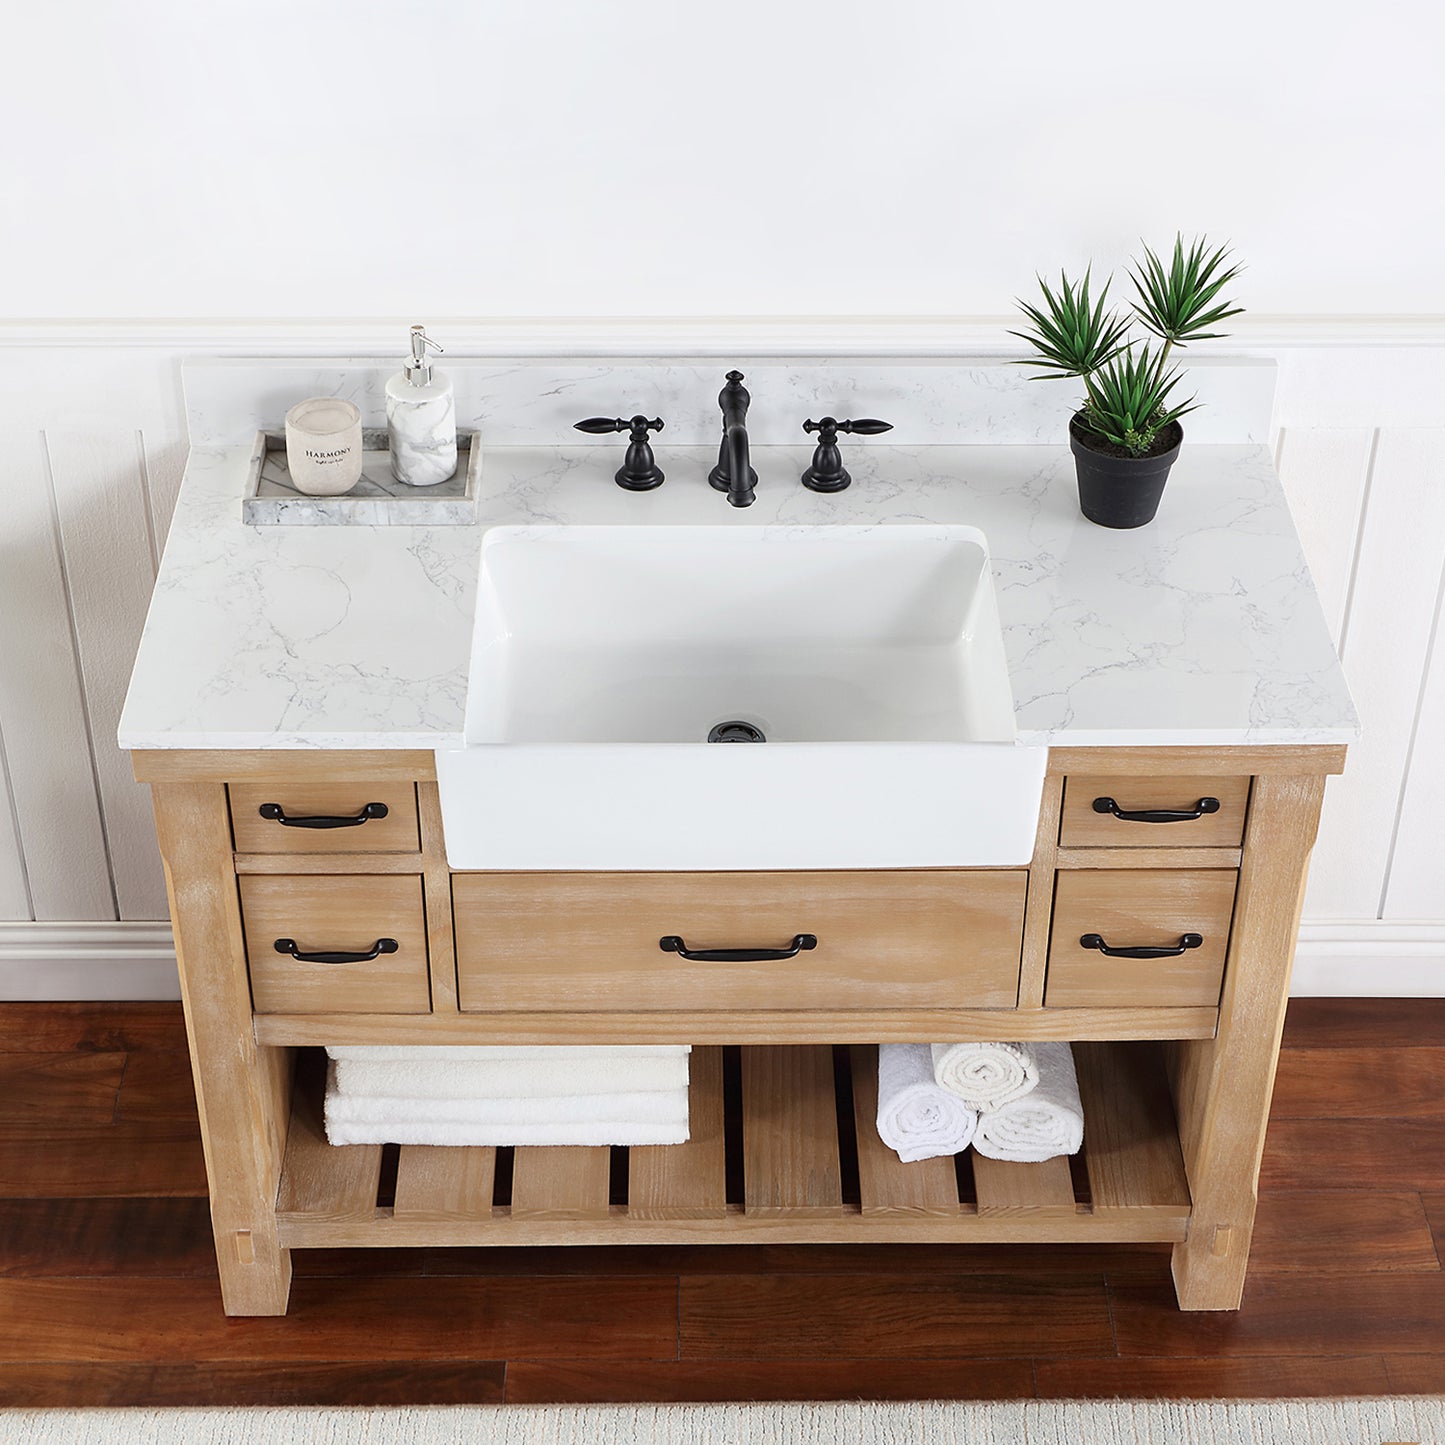 Villareal 48" Single Bath Vanity in Weathered Pine with Composite Stone Top in White, White Farmhouse Basin